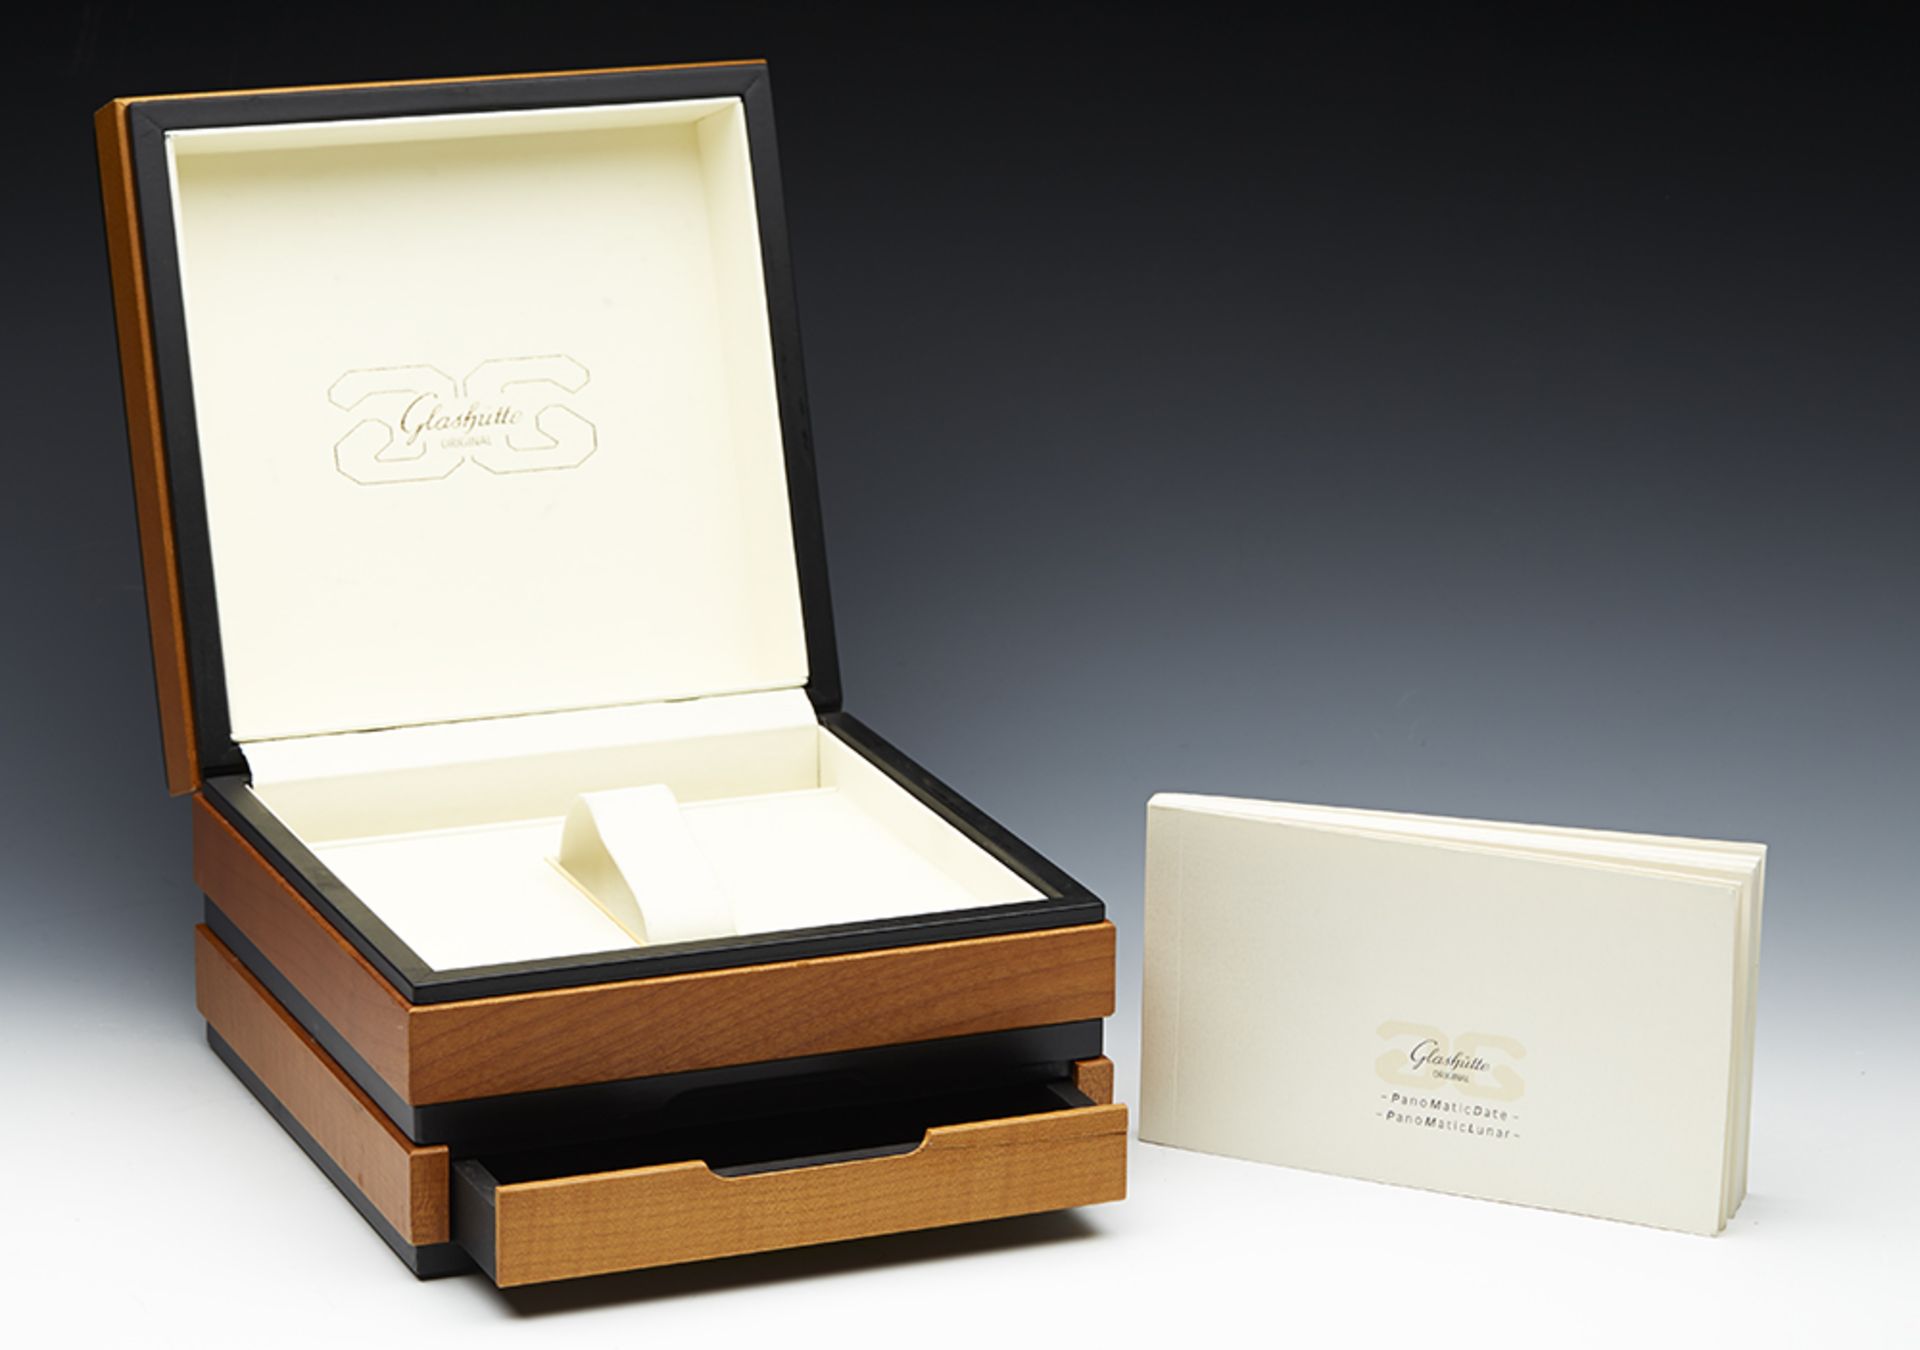 Glashutte, Panomatic Date Platinum Limited Edition 9001030304 - Image 9 of 11